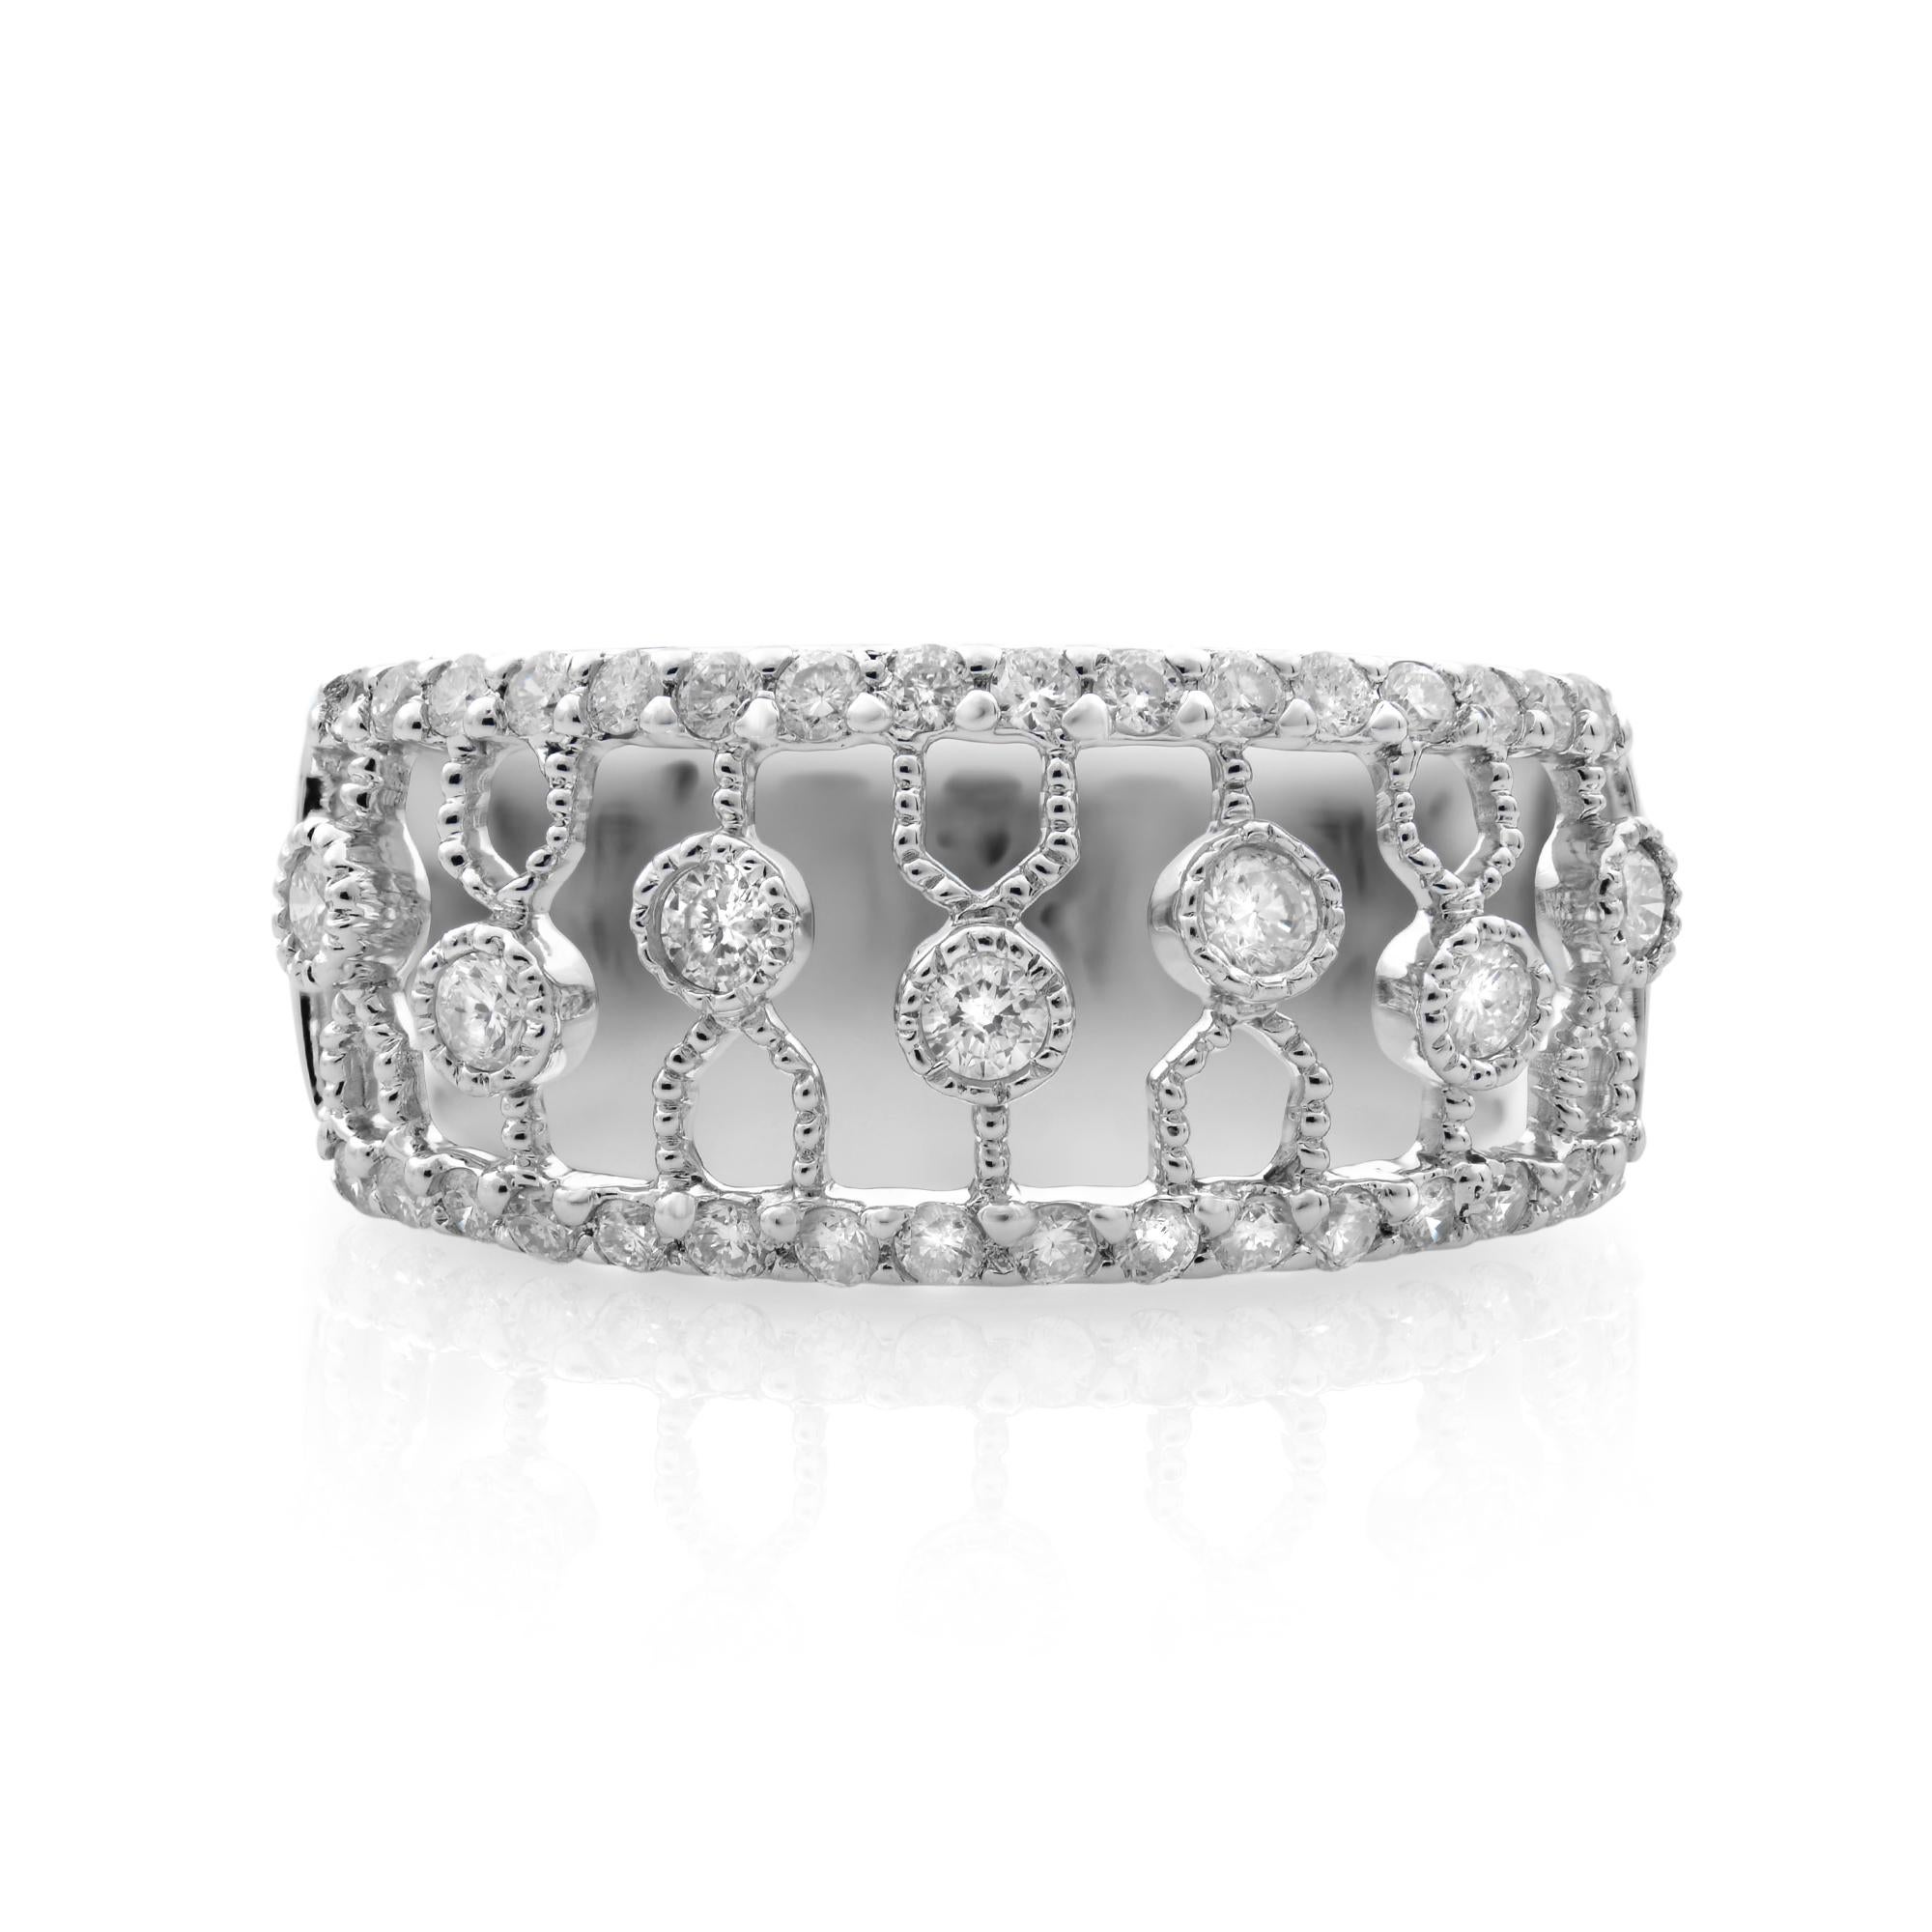 This wide band openwork design ring is crafted from rich 14K white gold. Set with  tiny diamonds, totaling in 0.50 carat. Diamond color G and VS2 clarity. Ring size 6.5. Width of the ring 9.00-5.40mm. Comes with a presentable gift box.